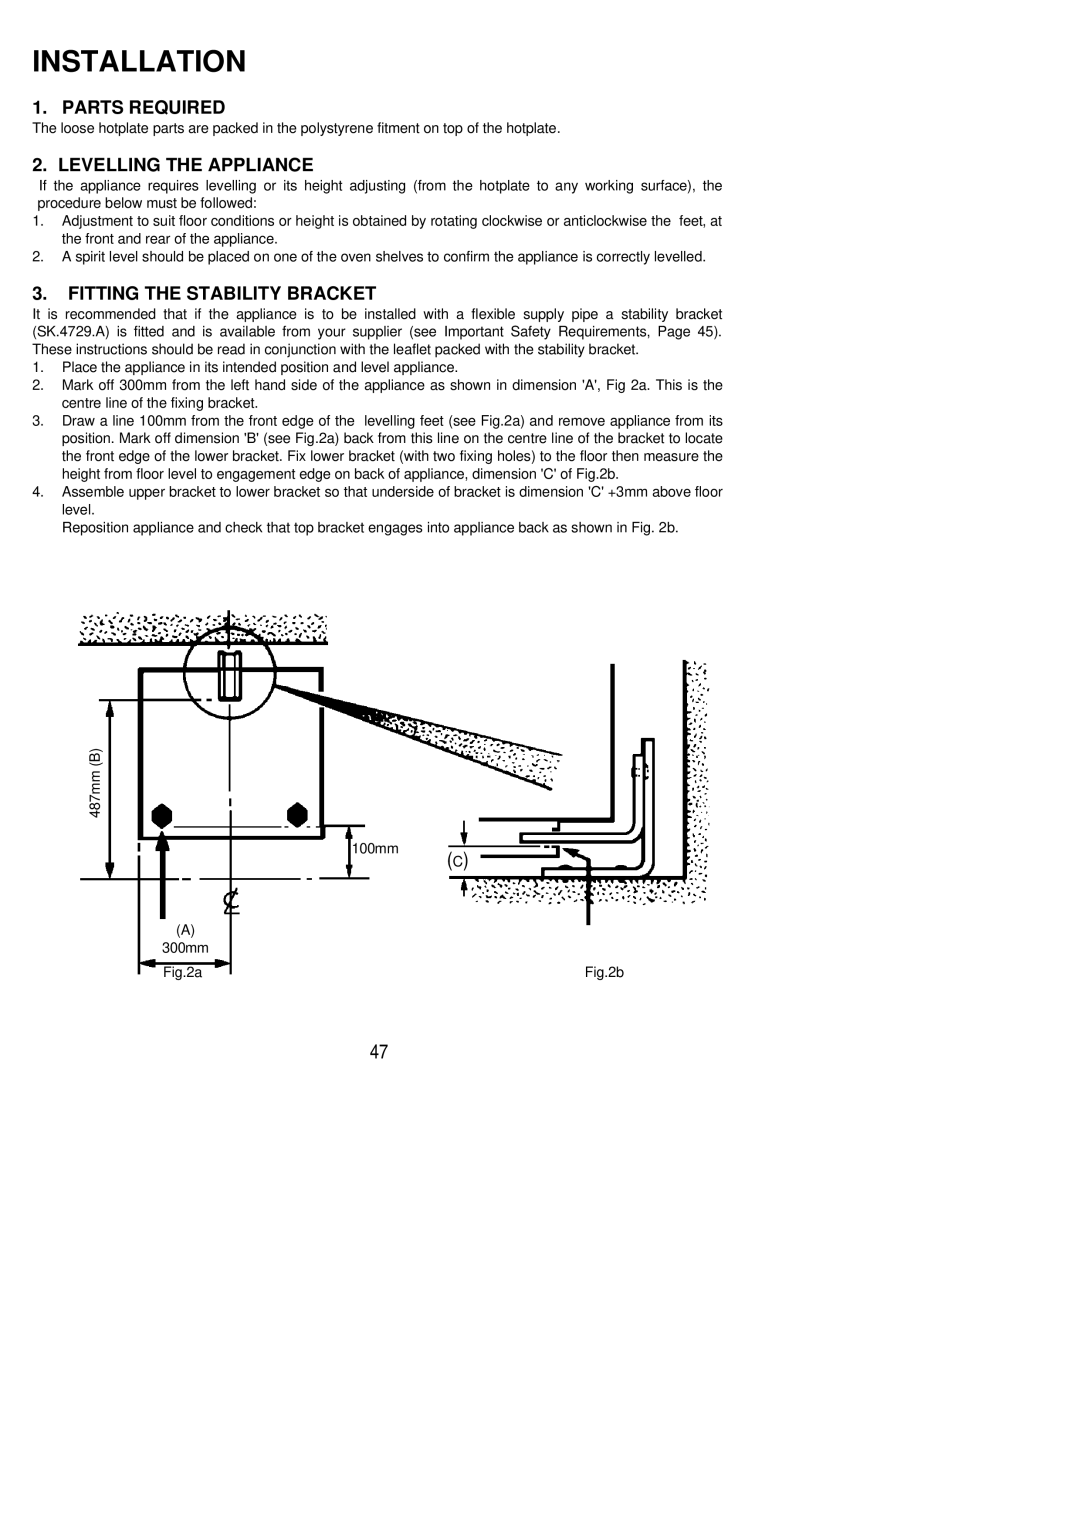 Electrolux SG 556 installation instructions Parts Required, Levelling the Appliance, Fitting the Stability Bracket 